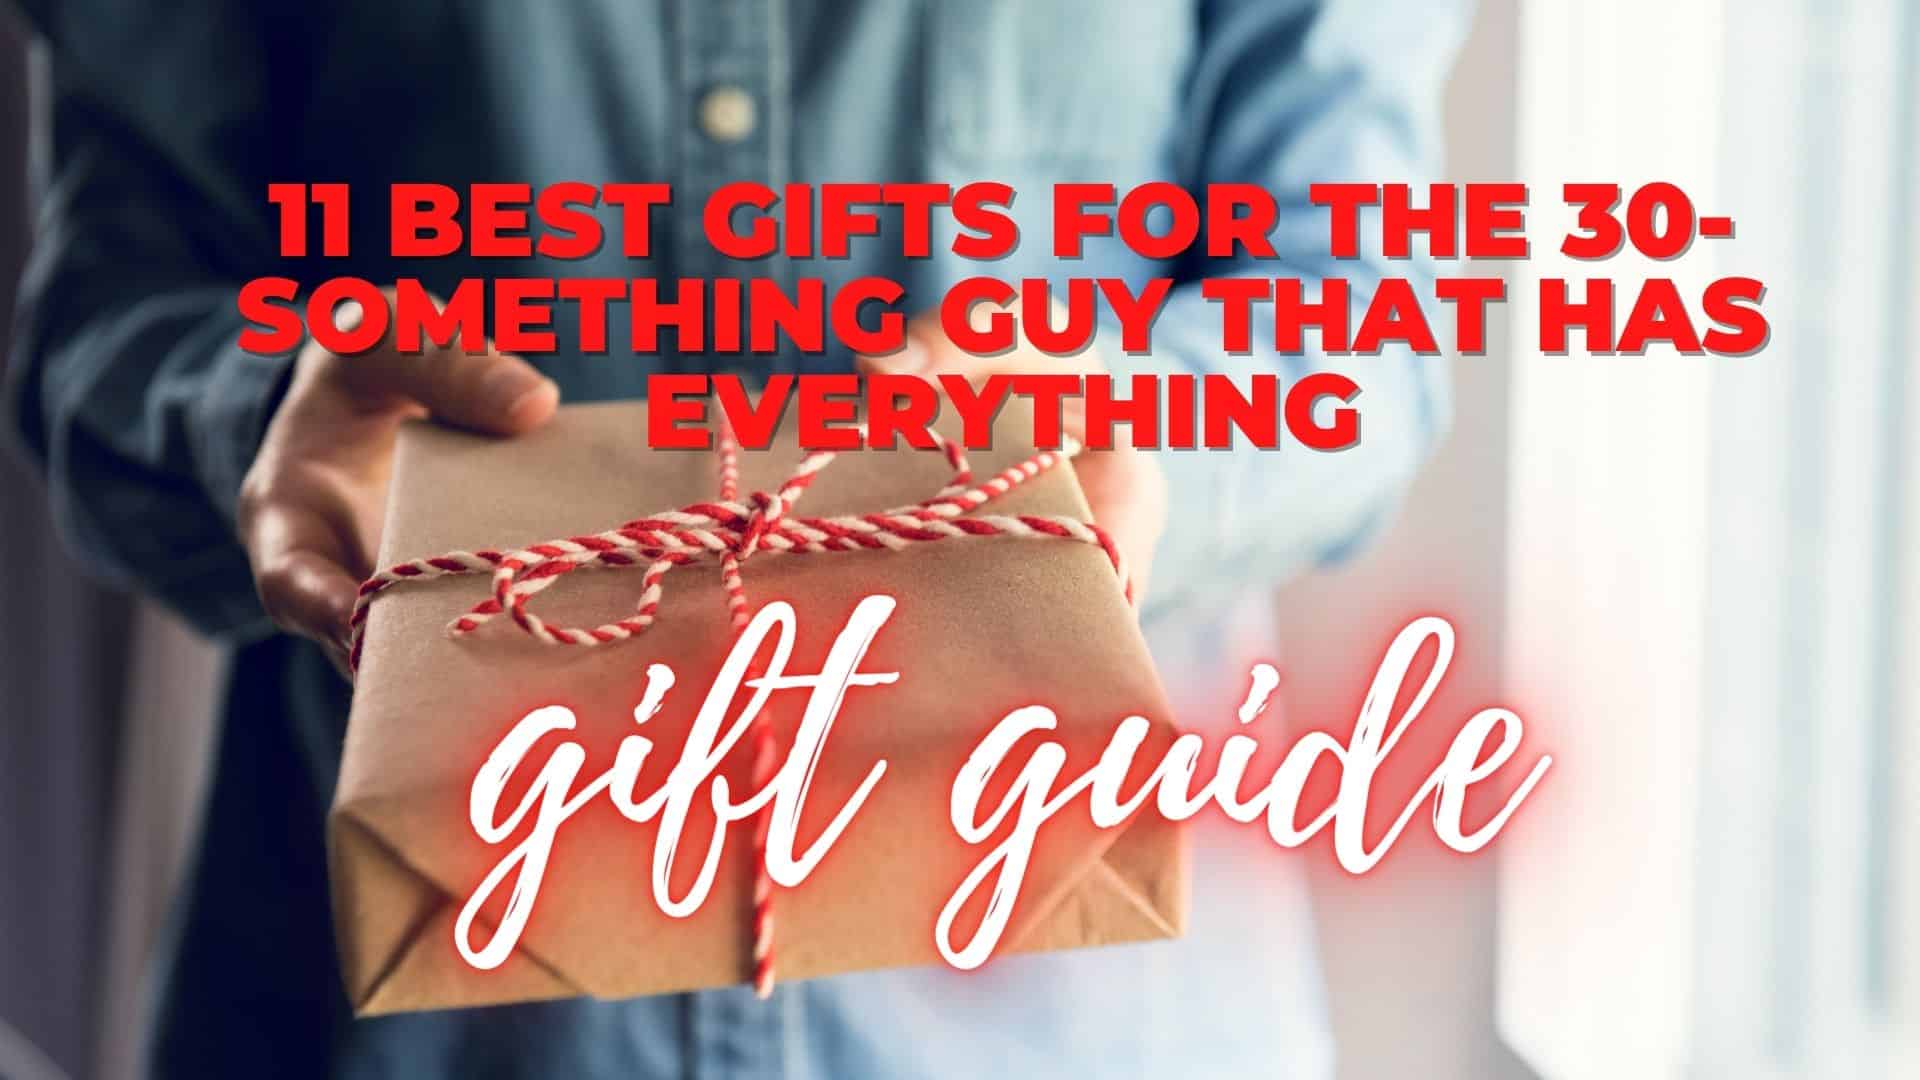 Best Gifts for the 30-something guy that has everything